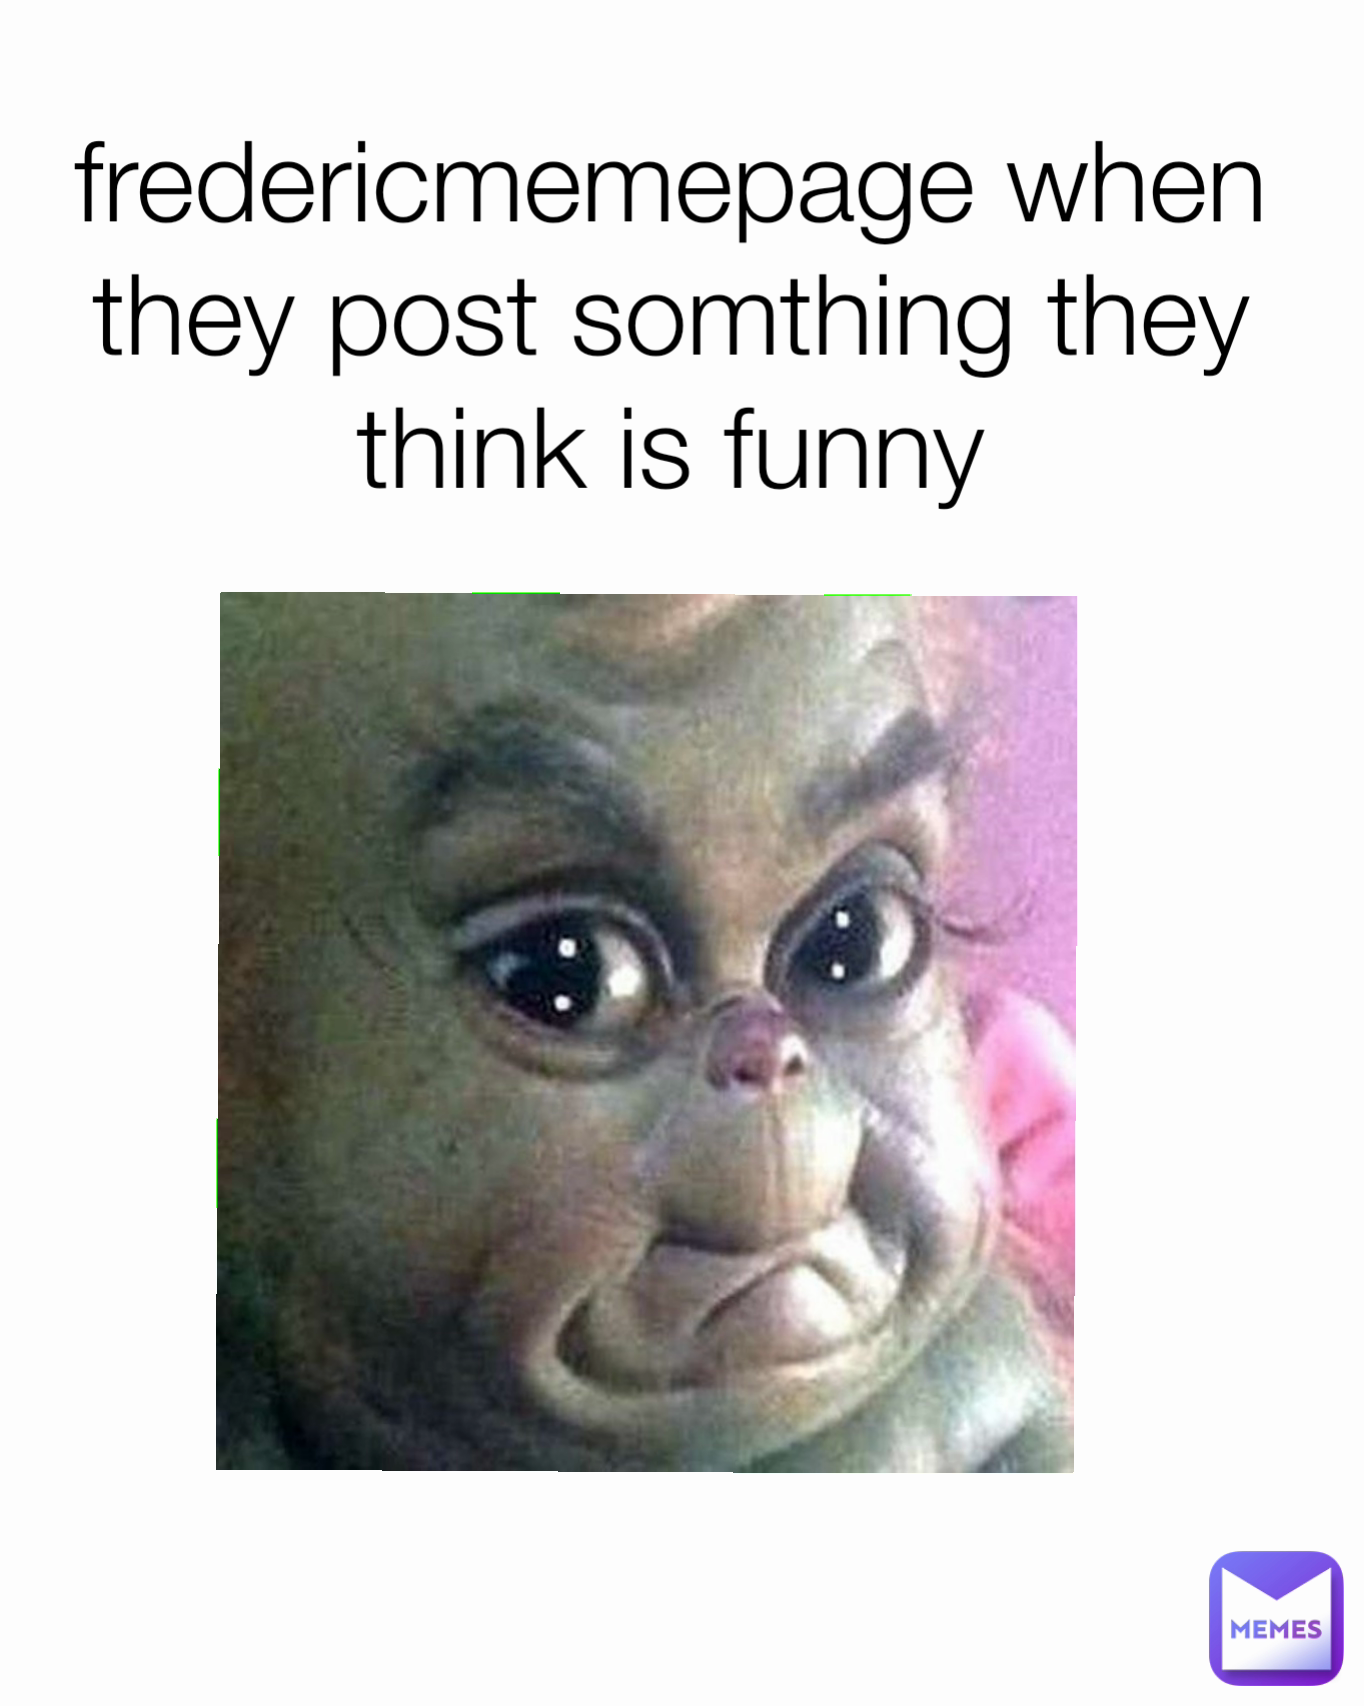 fredericmemepage when they post somthing they think is funny | @buddy2134 |  Memes